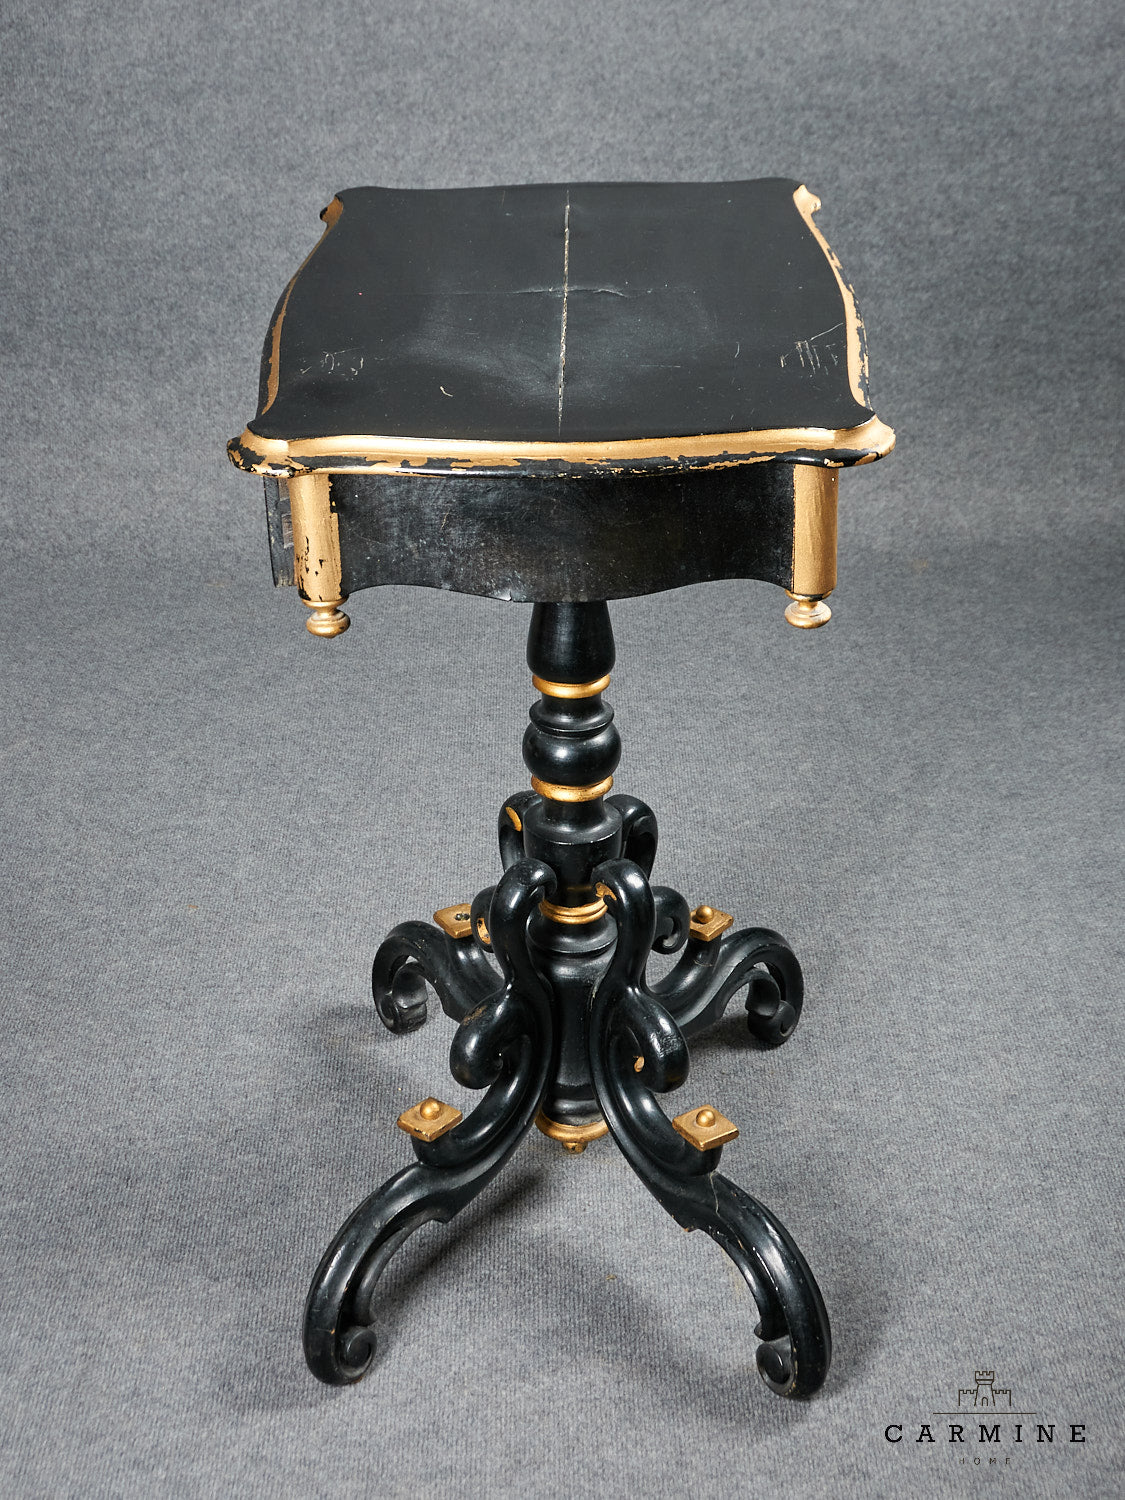 Sewing table, around 1880